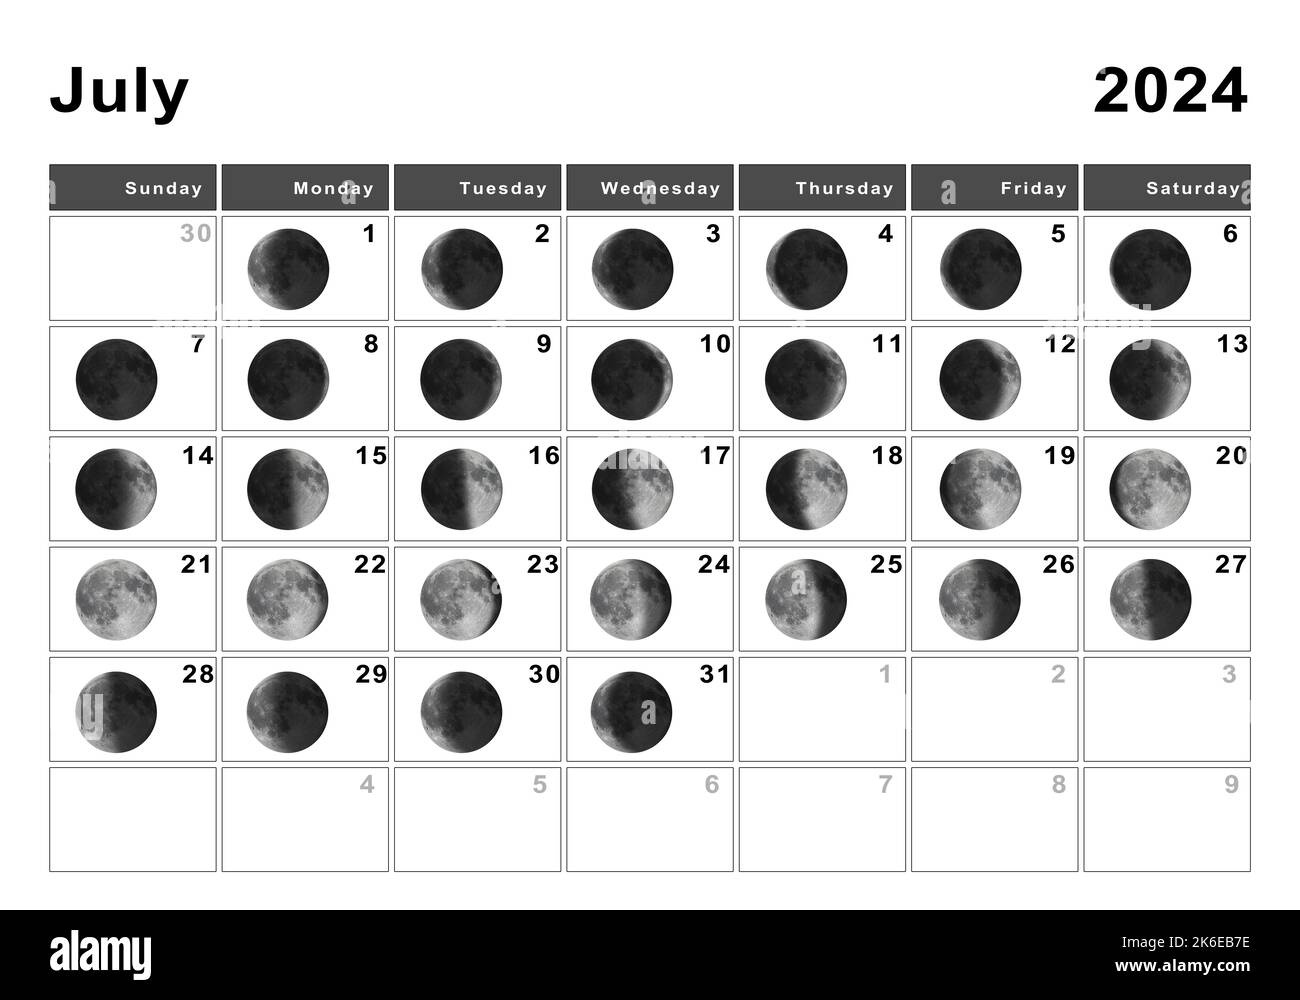 July 2024 Lunar Calendar, Moon Cycles, Moon Phases Stock Photo - Alamy pertaining to July 17th Lunar Calendar 2024